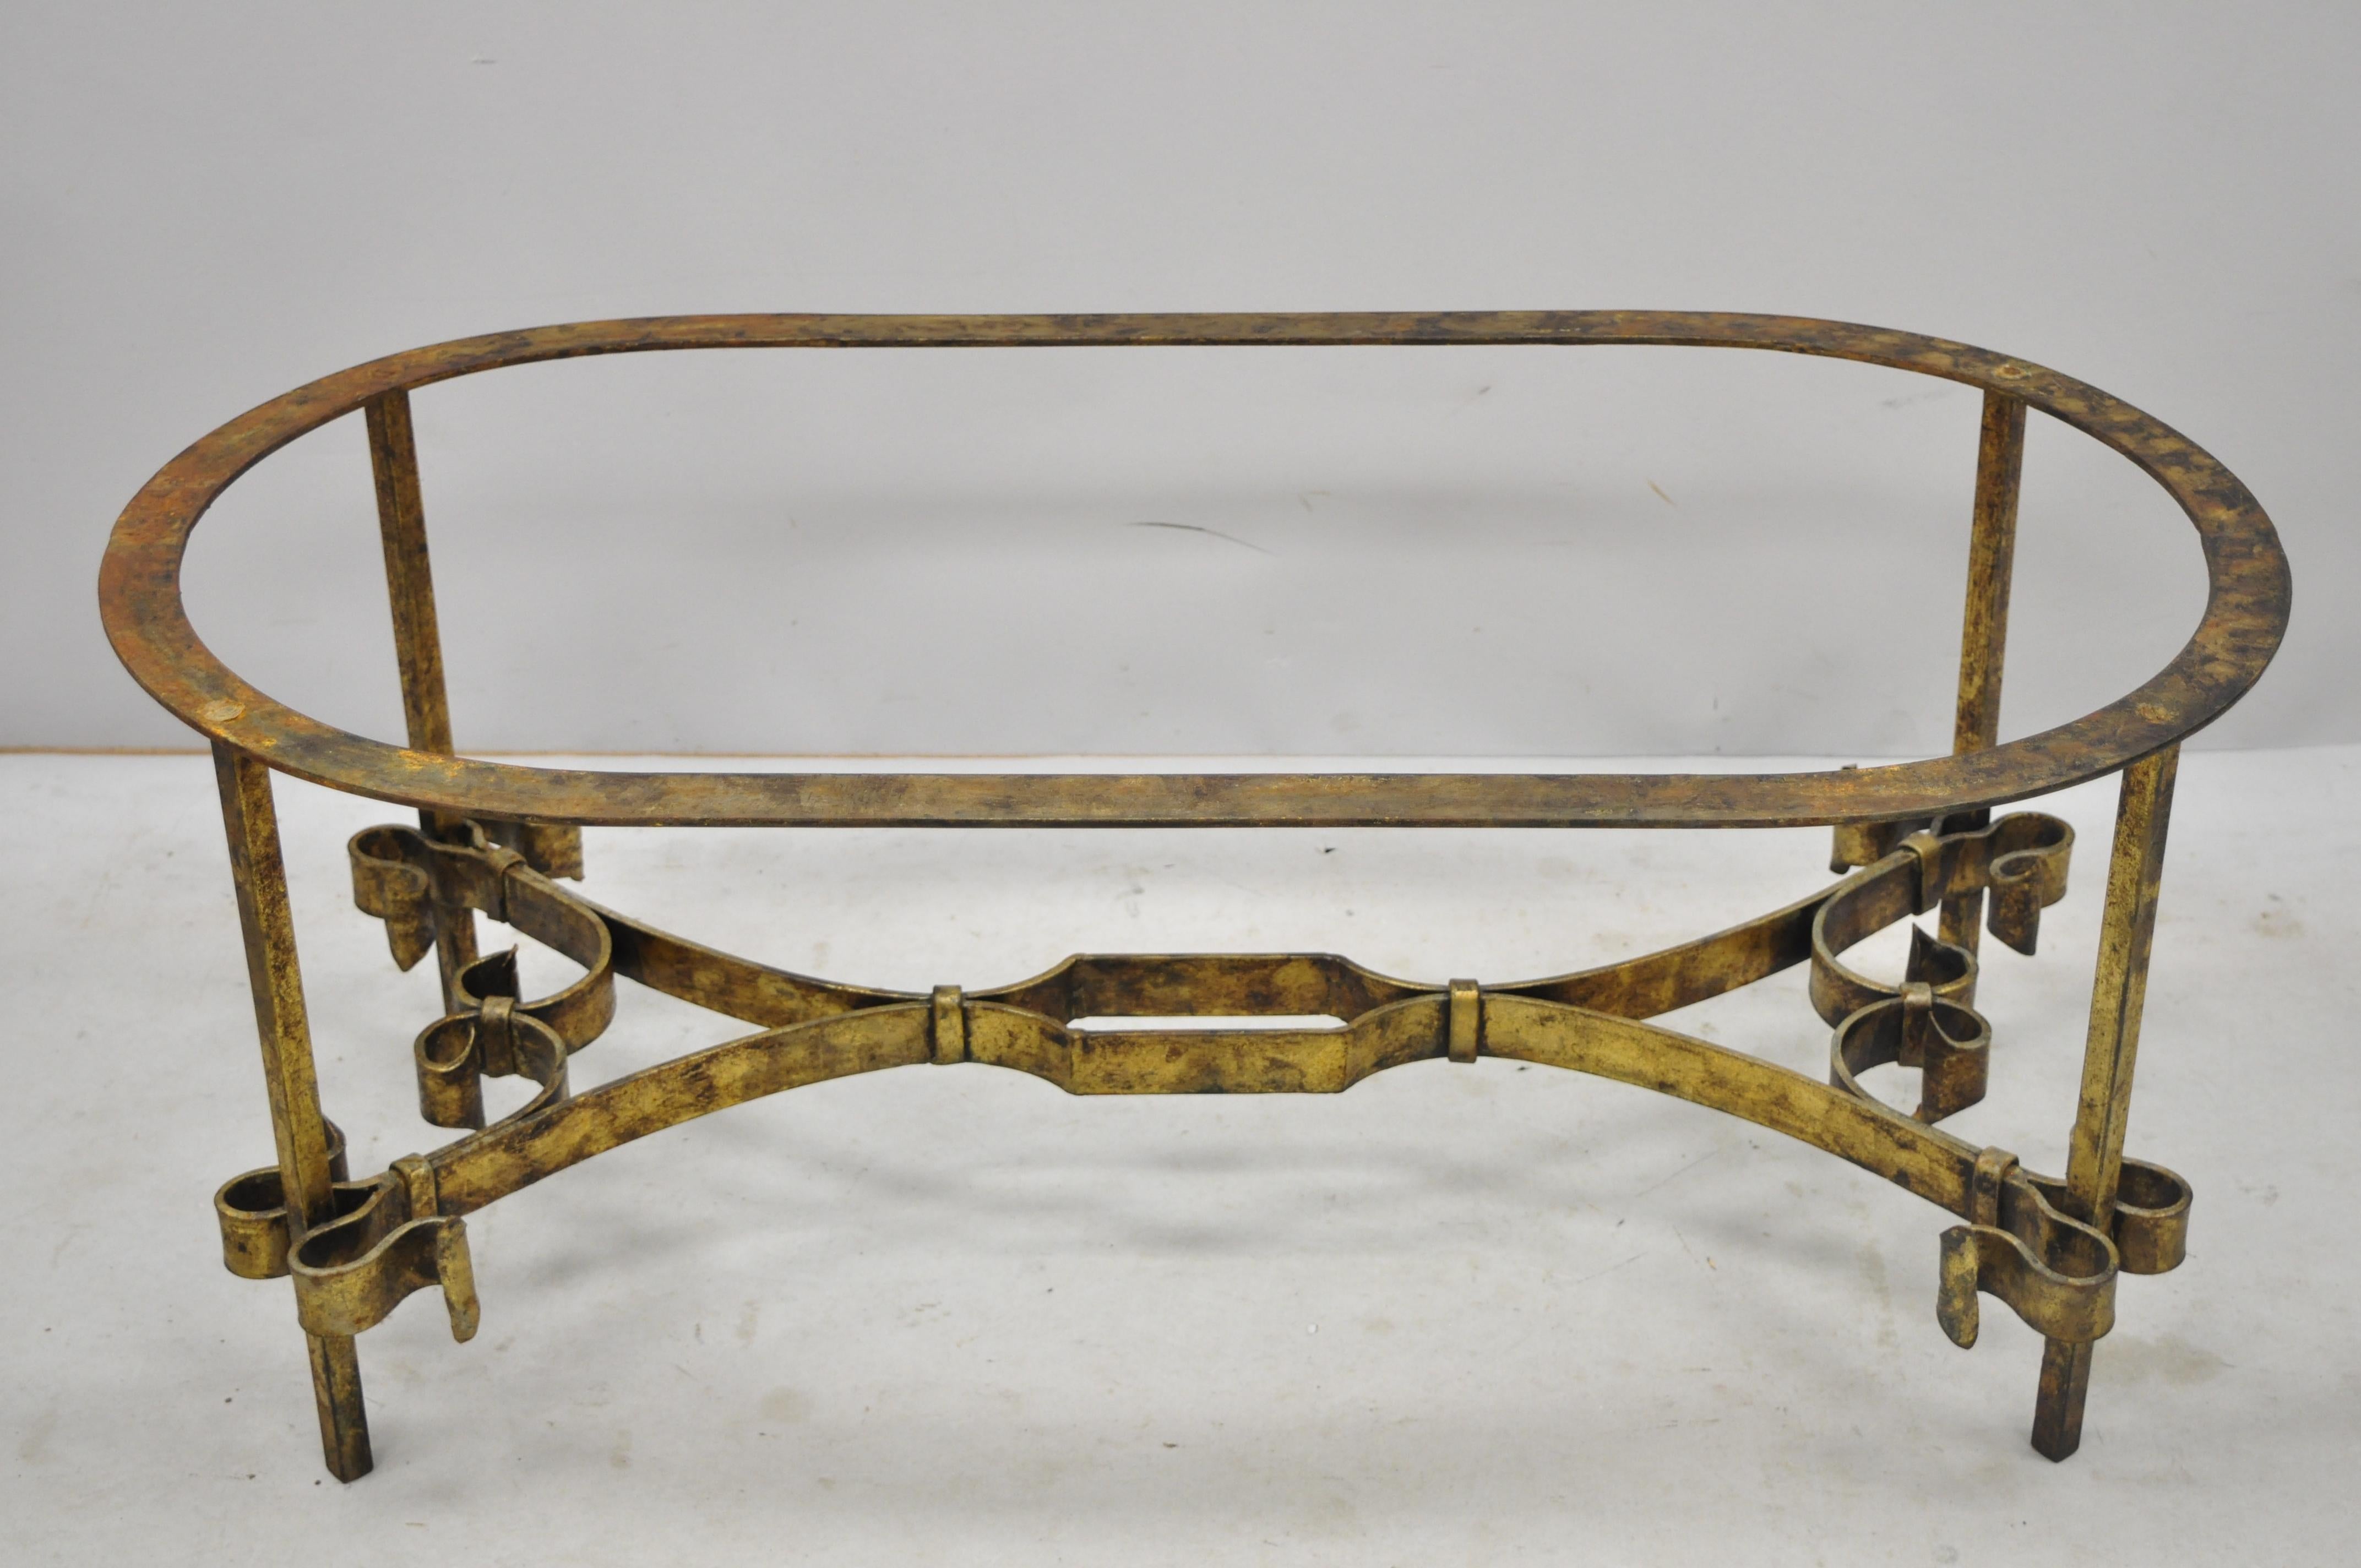 Vintage Italian Hollywood Regency gold gilt iron oval coffee table base. Listing includes heavy iron construction, fancy scrollwork frame, oval top, stretcher base, distressed finish, great style and form. No glass, circa mid-20th century.